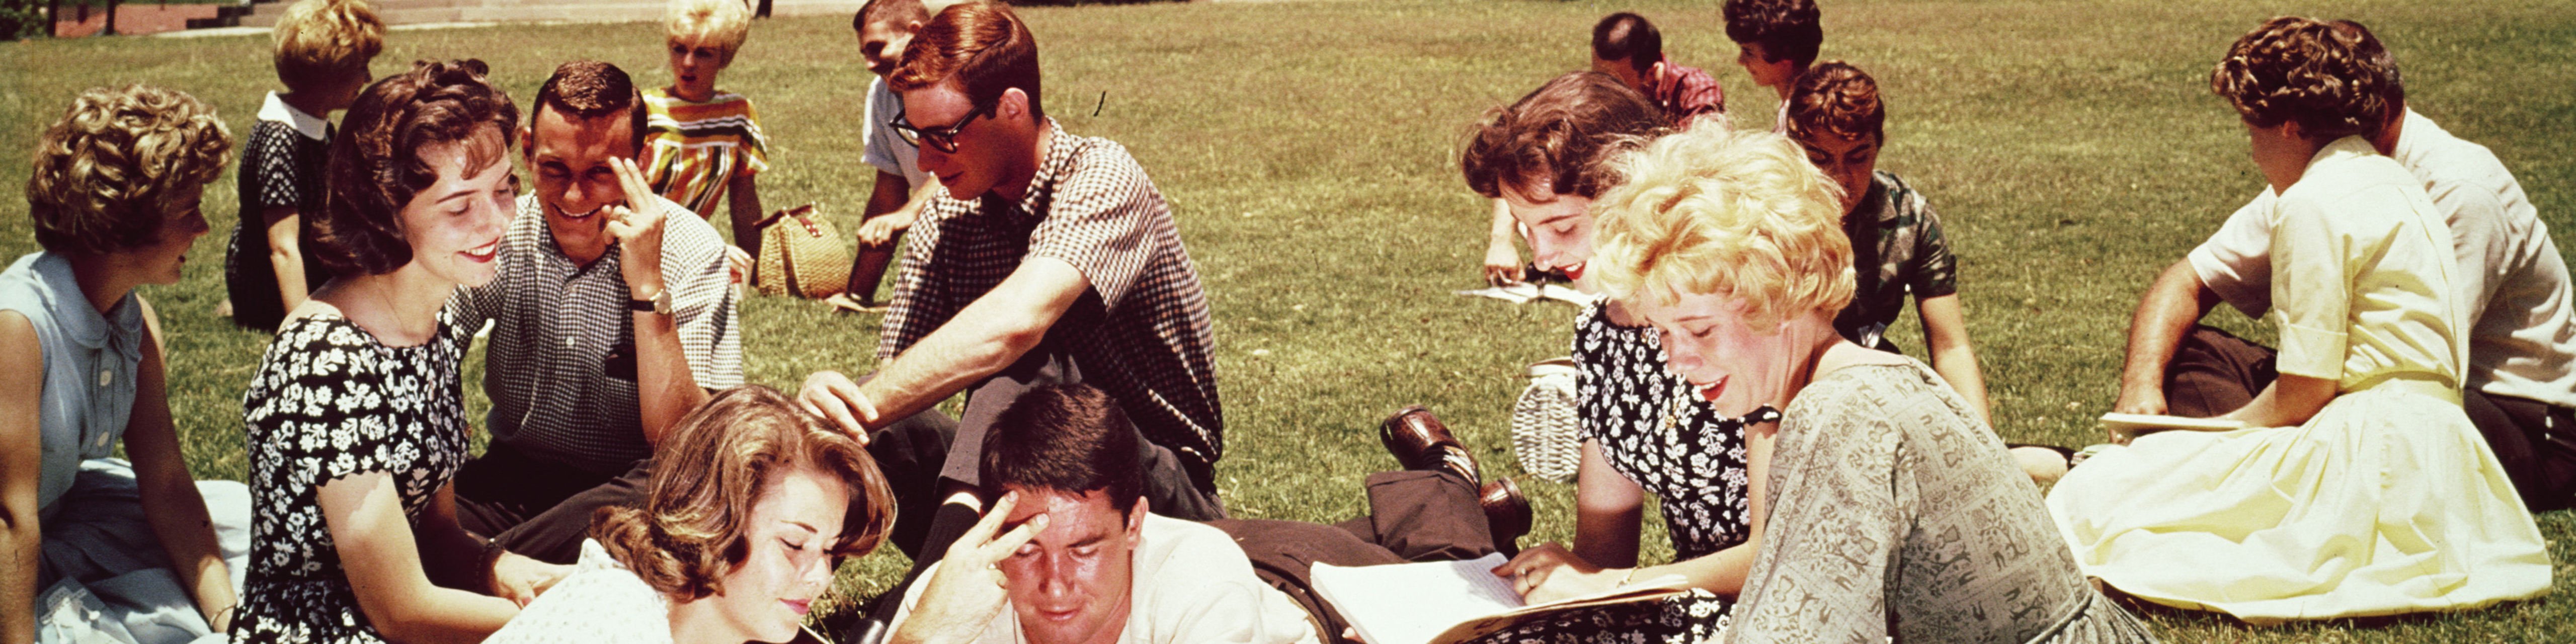 College students studying on the lawn on campus, 1970.